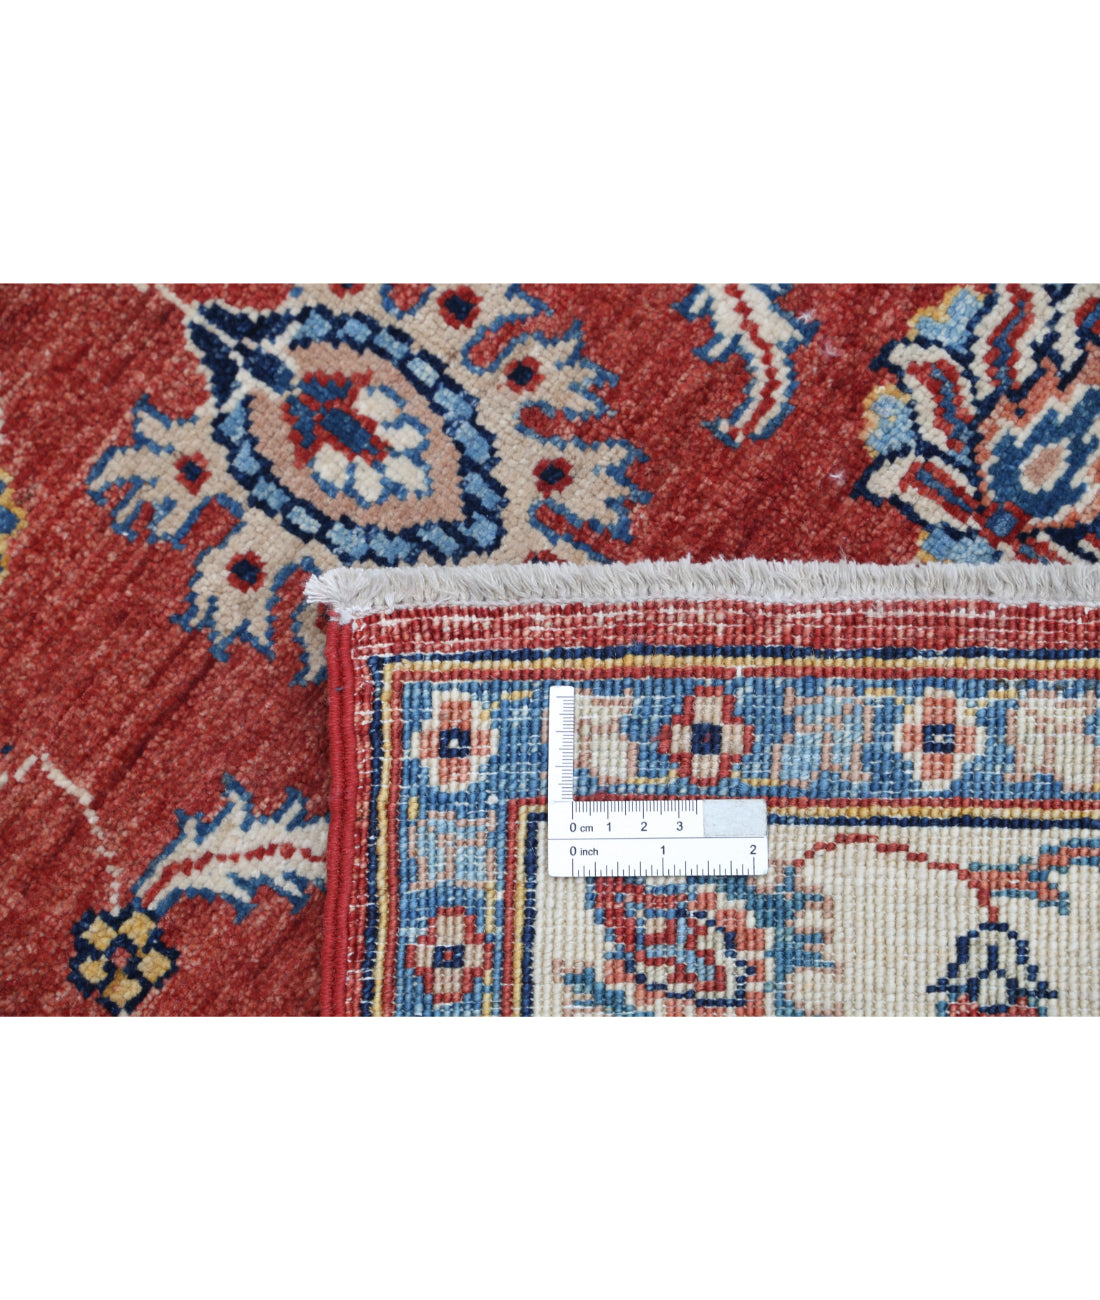 Ziegler 2'7'' X 4'1'' Hand-Knotted Wool Rug 2'7'' x 4'1'' (78 X 123) / Red / Ivory